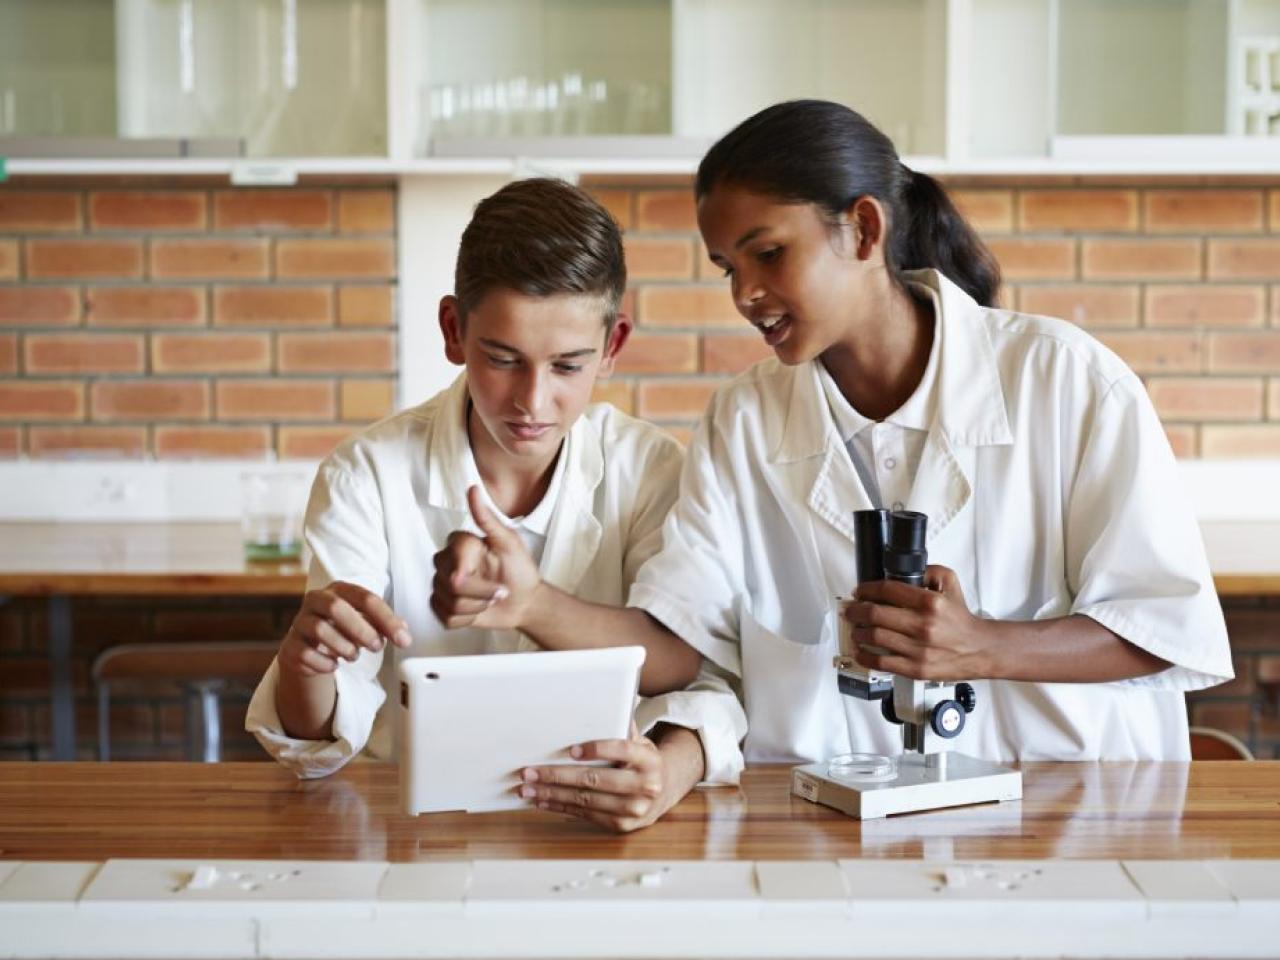 Two young students in a lab looking at a tablet device while another holds a microscope